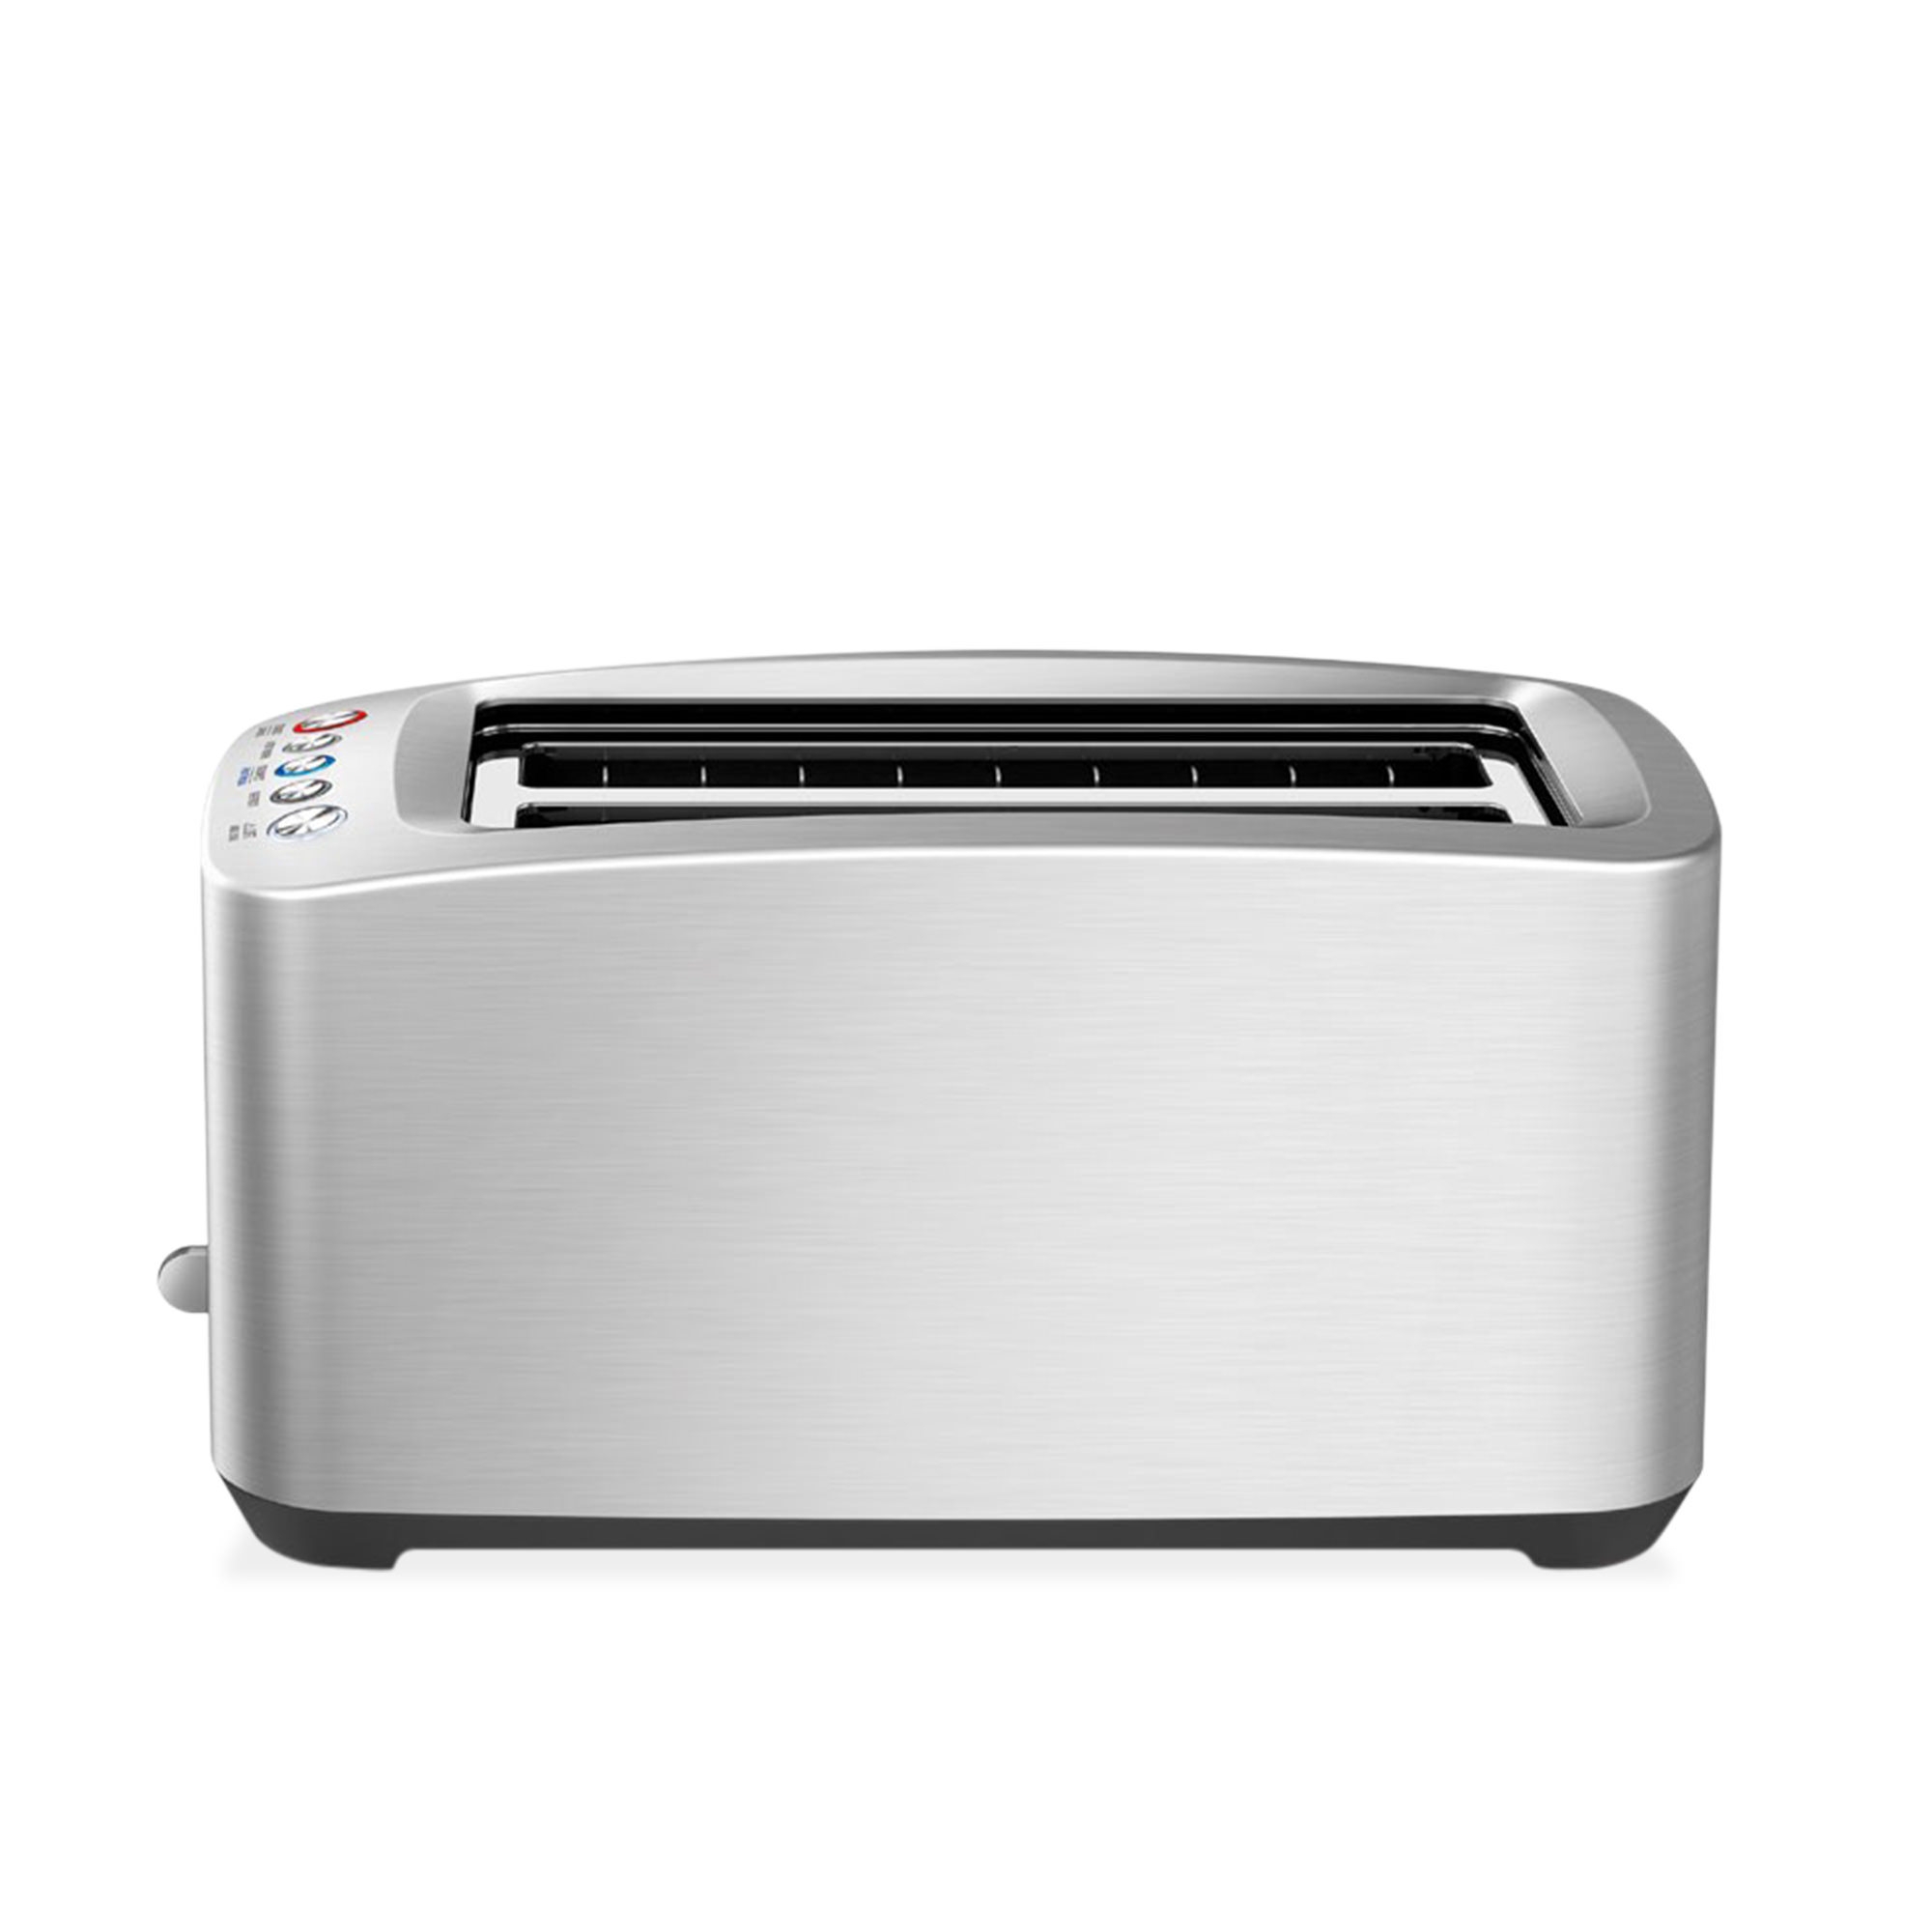 Breville The Smart 4 Slice Toaster with Fruit Bread Setting Image 2